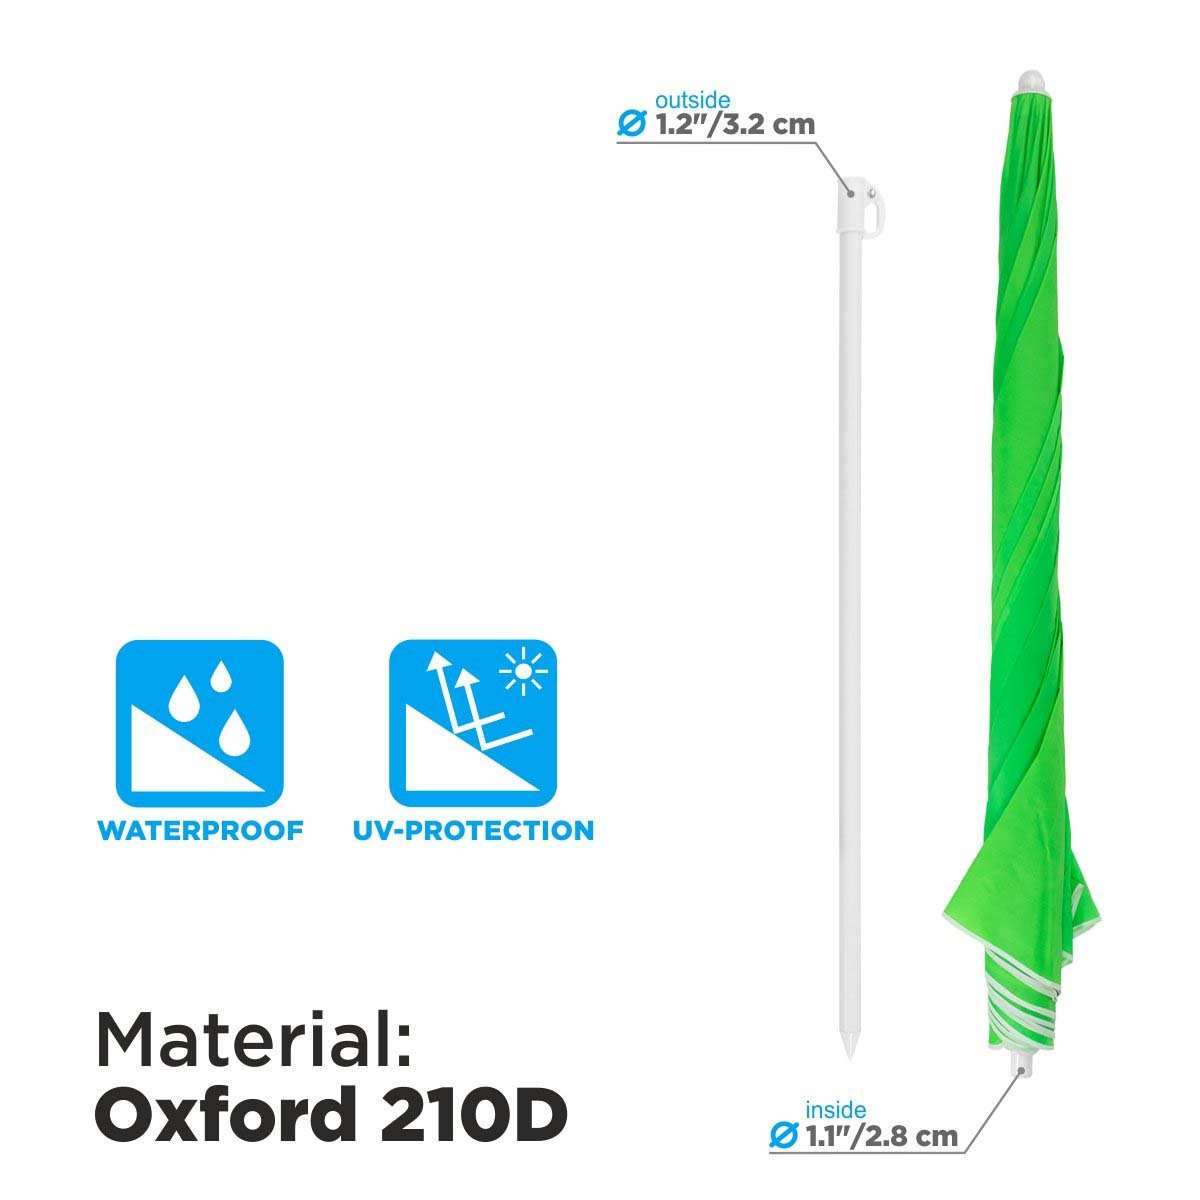 Green Tilting Beach Umbrella is made of waterproof Oxfprd 210D featuring UV protection